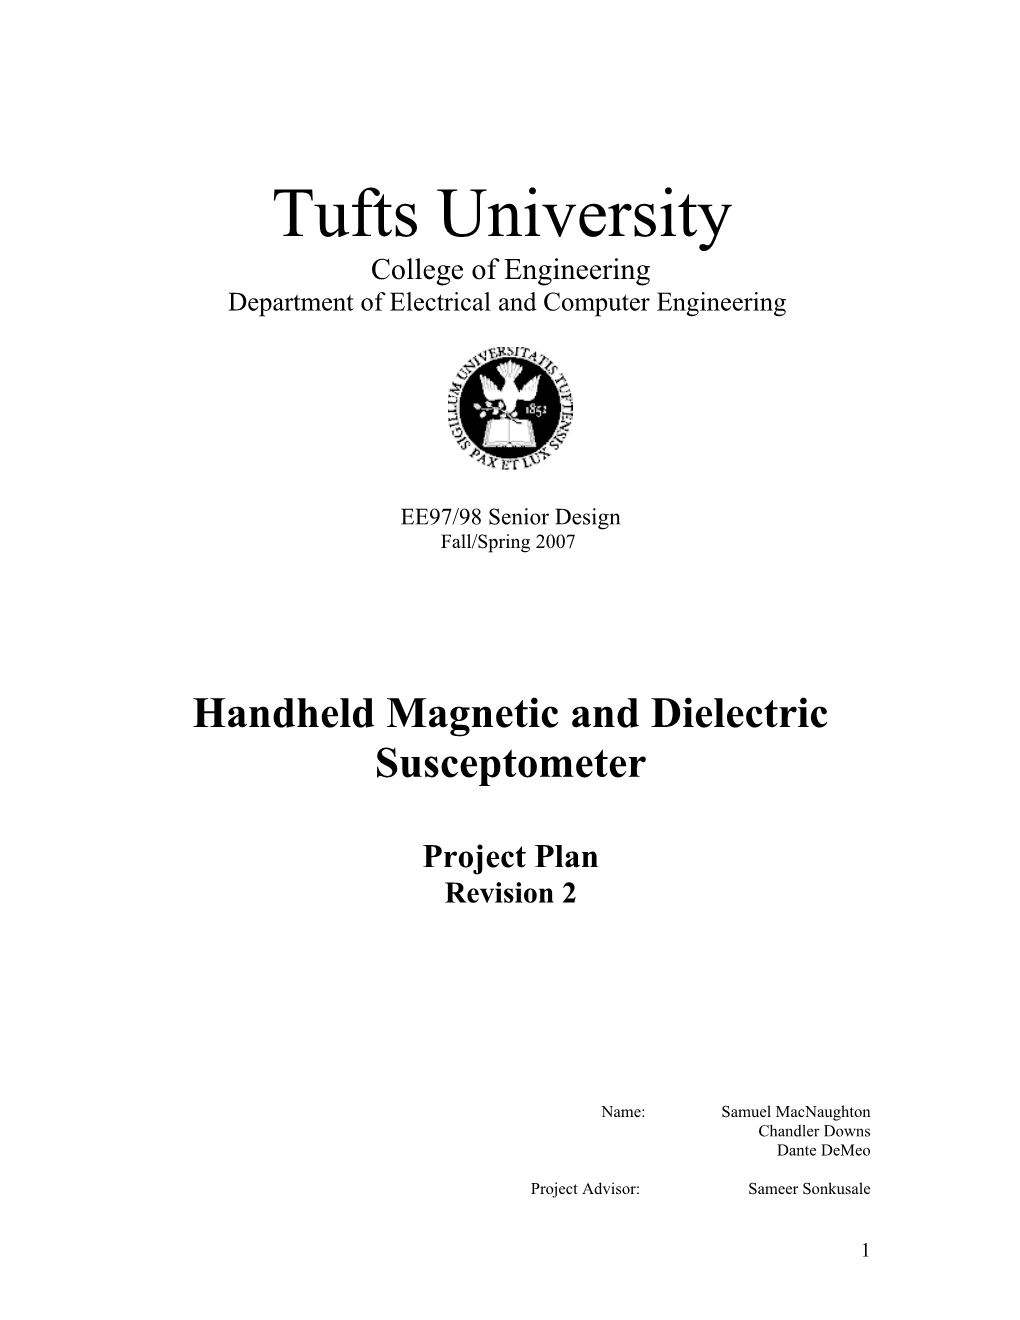 Handheld Magnetic and Dielectric Susceptometer